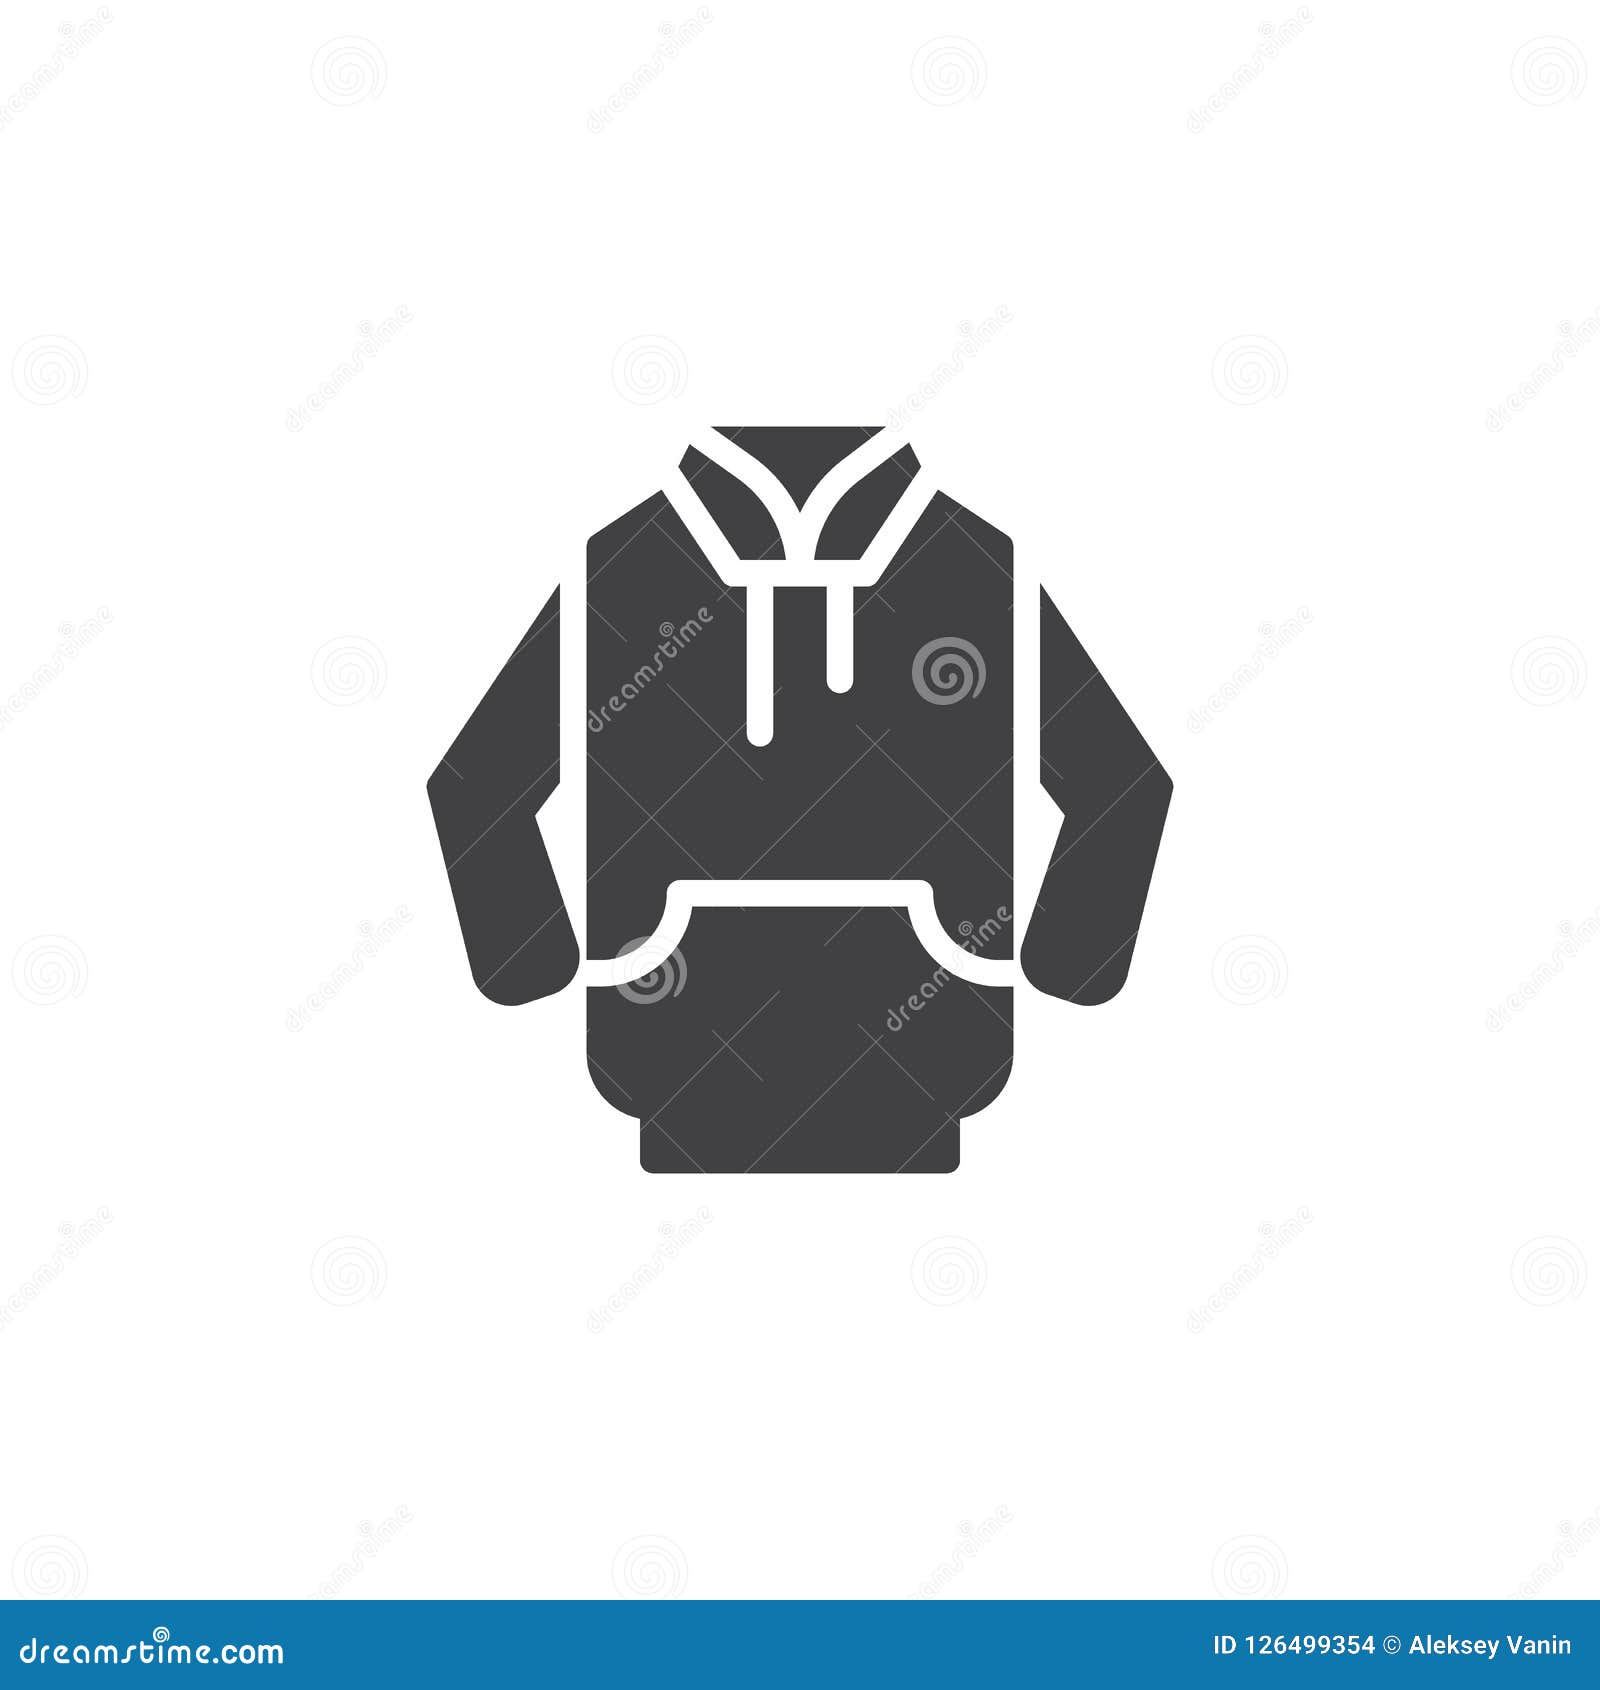 Hoodie vector icon stock vector. Illustration of apparel - 126499354